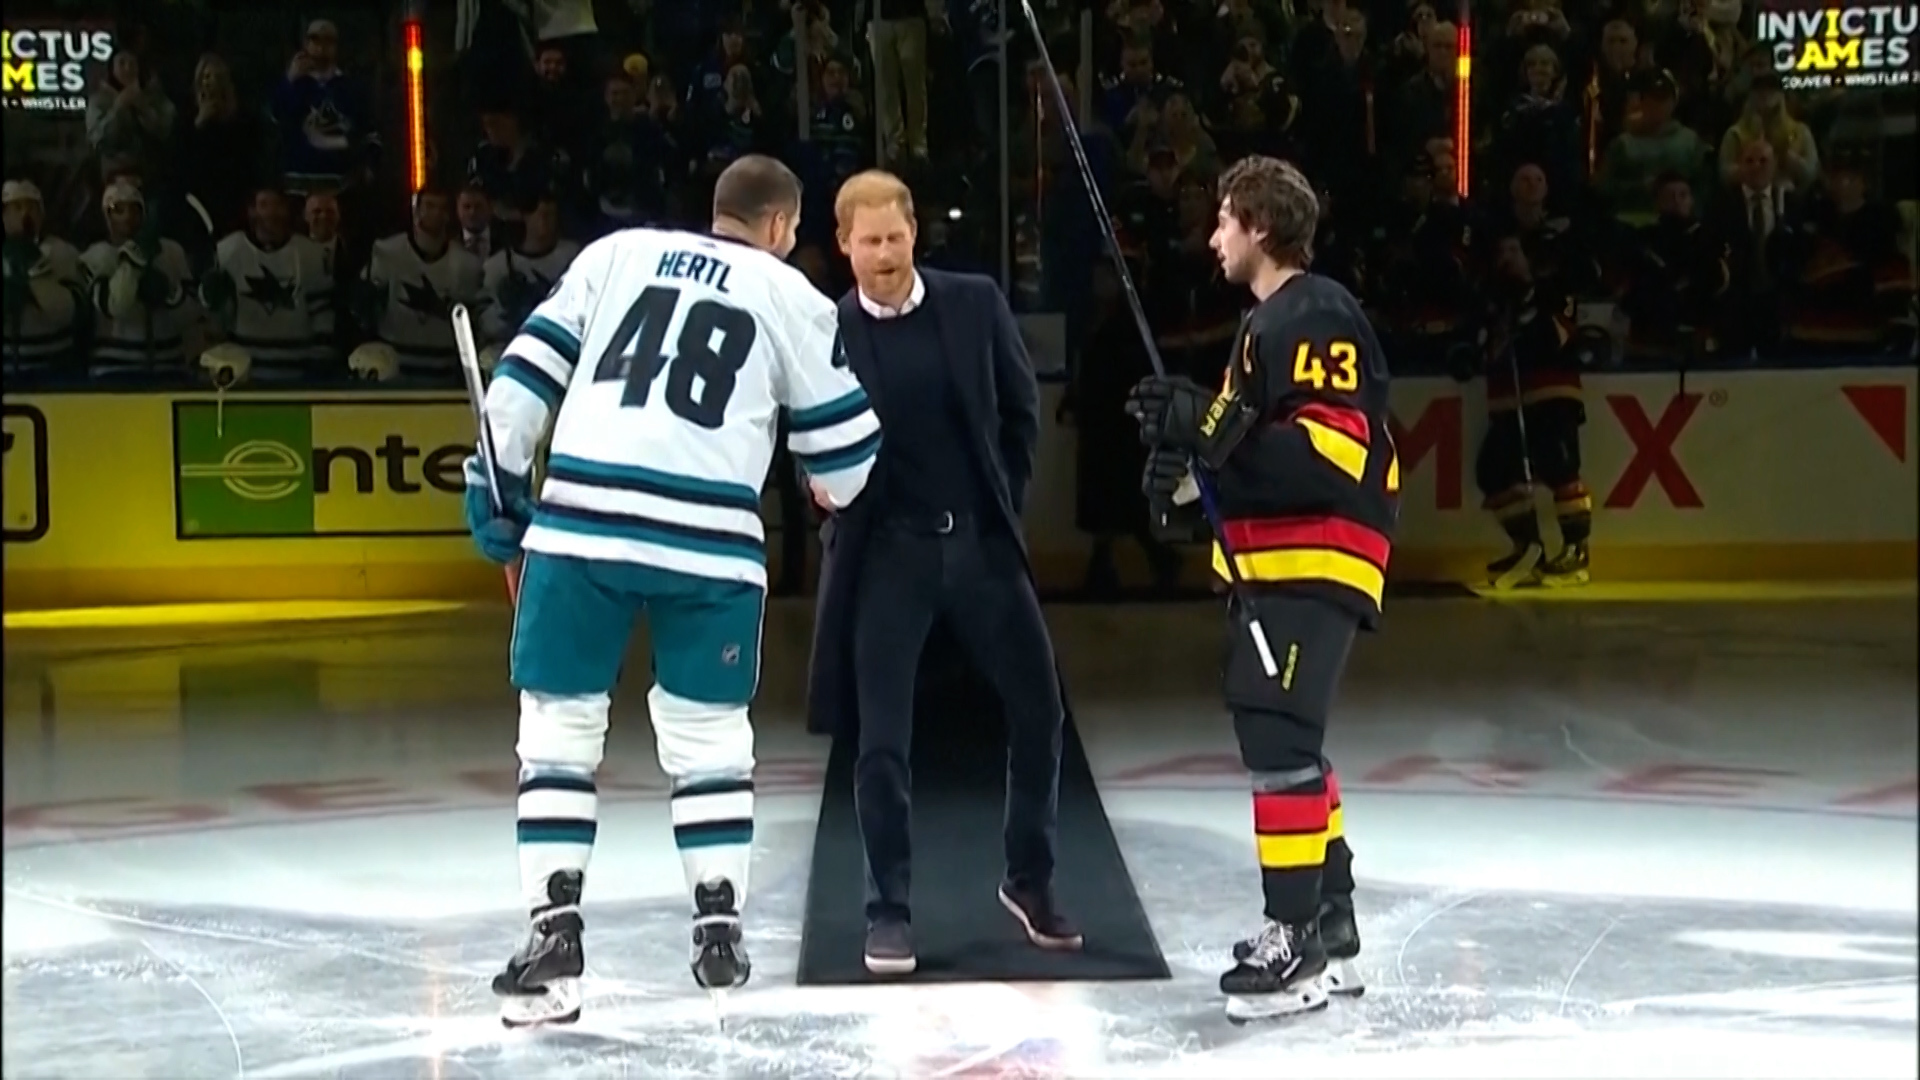 Prince Harry drops ceremonial puck ahead of Canucks-Sharks NHL game